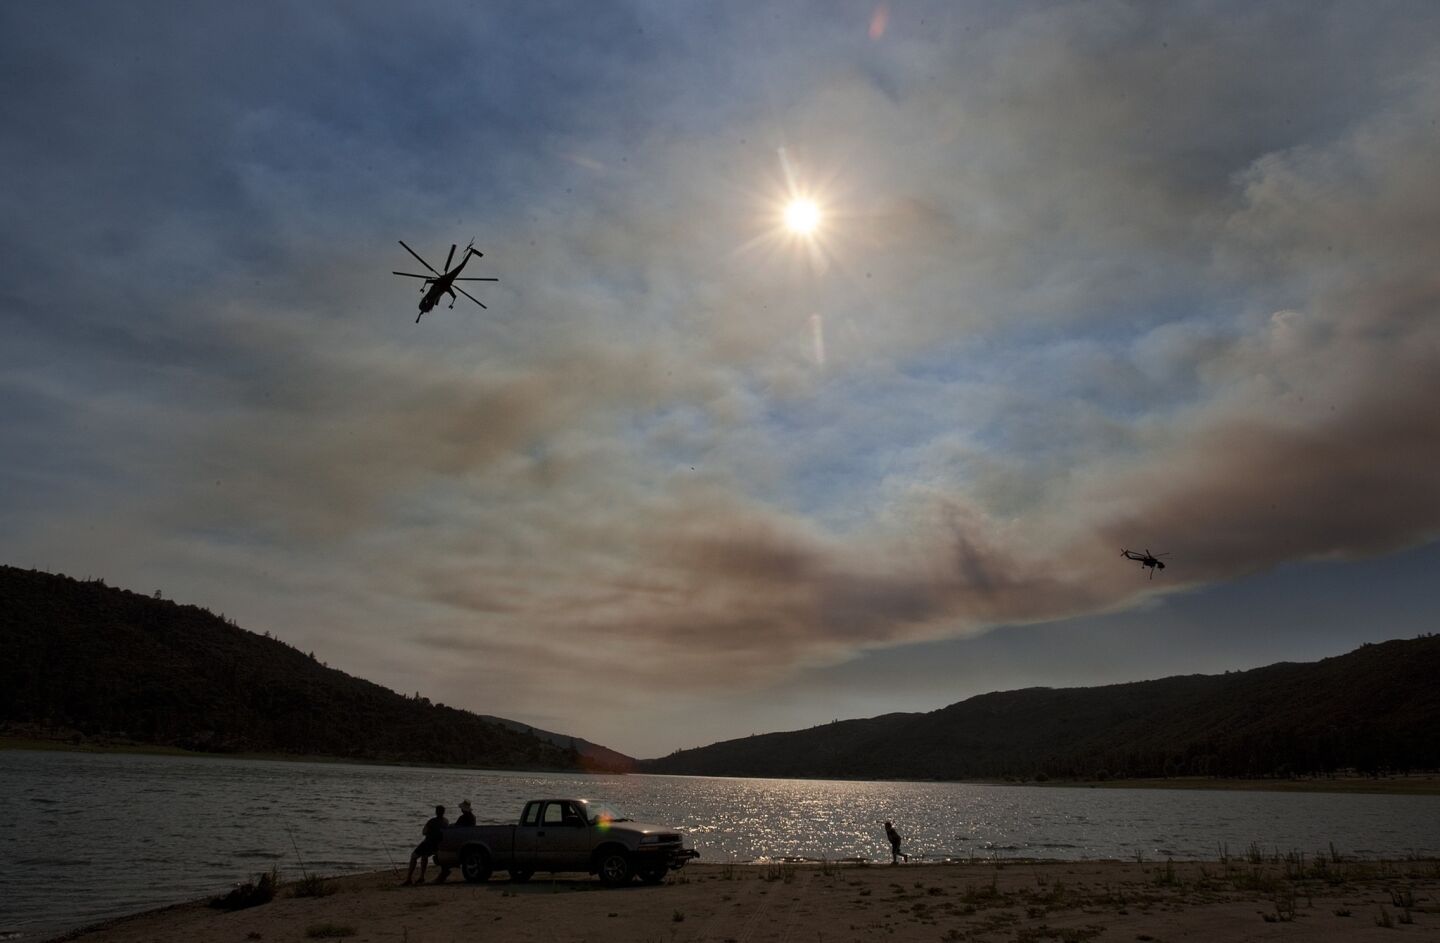 Orange hazy smoke fills the air above Lake Hemet as a water-dropping helicopter uses the lake to refill during the Mountain fire off Highway 74 at Mt. San Jacinto State Park.